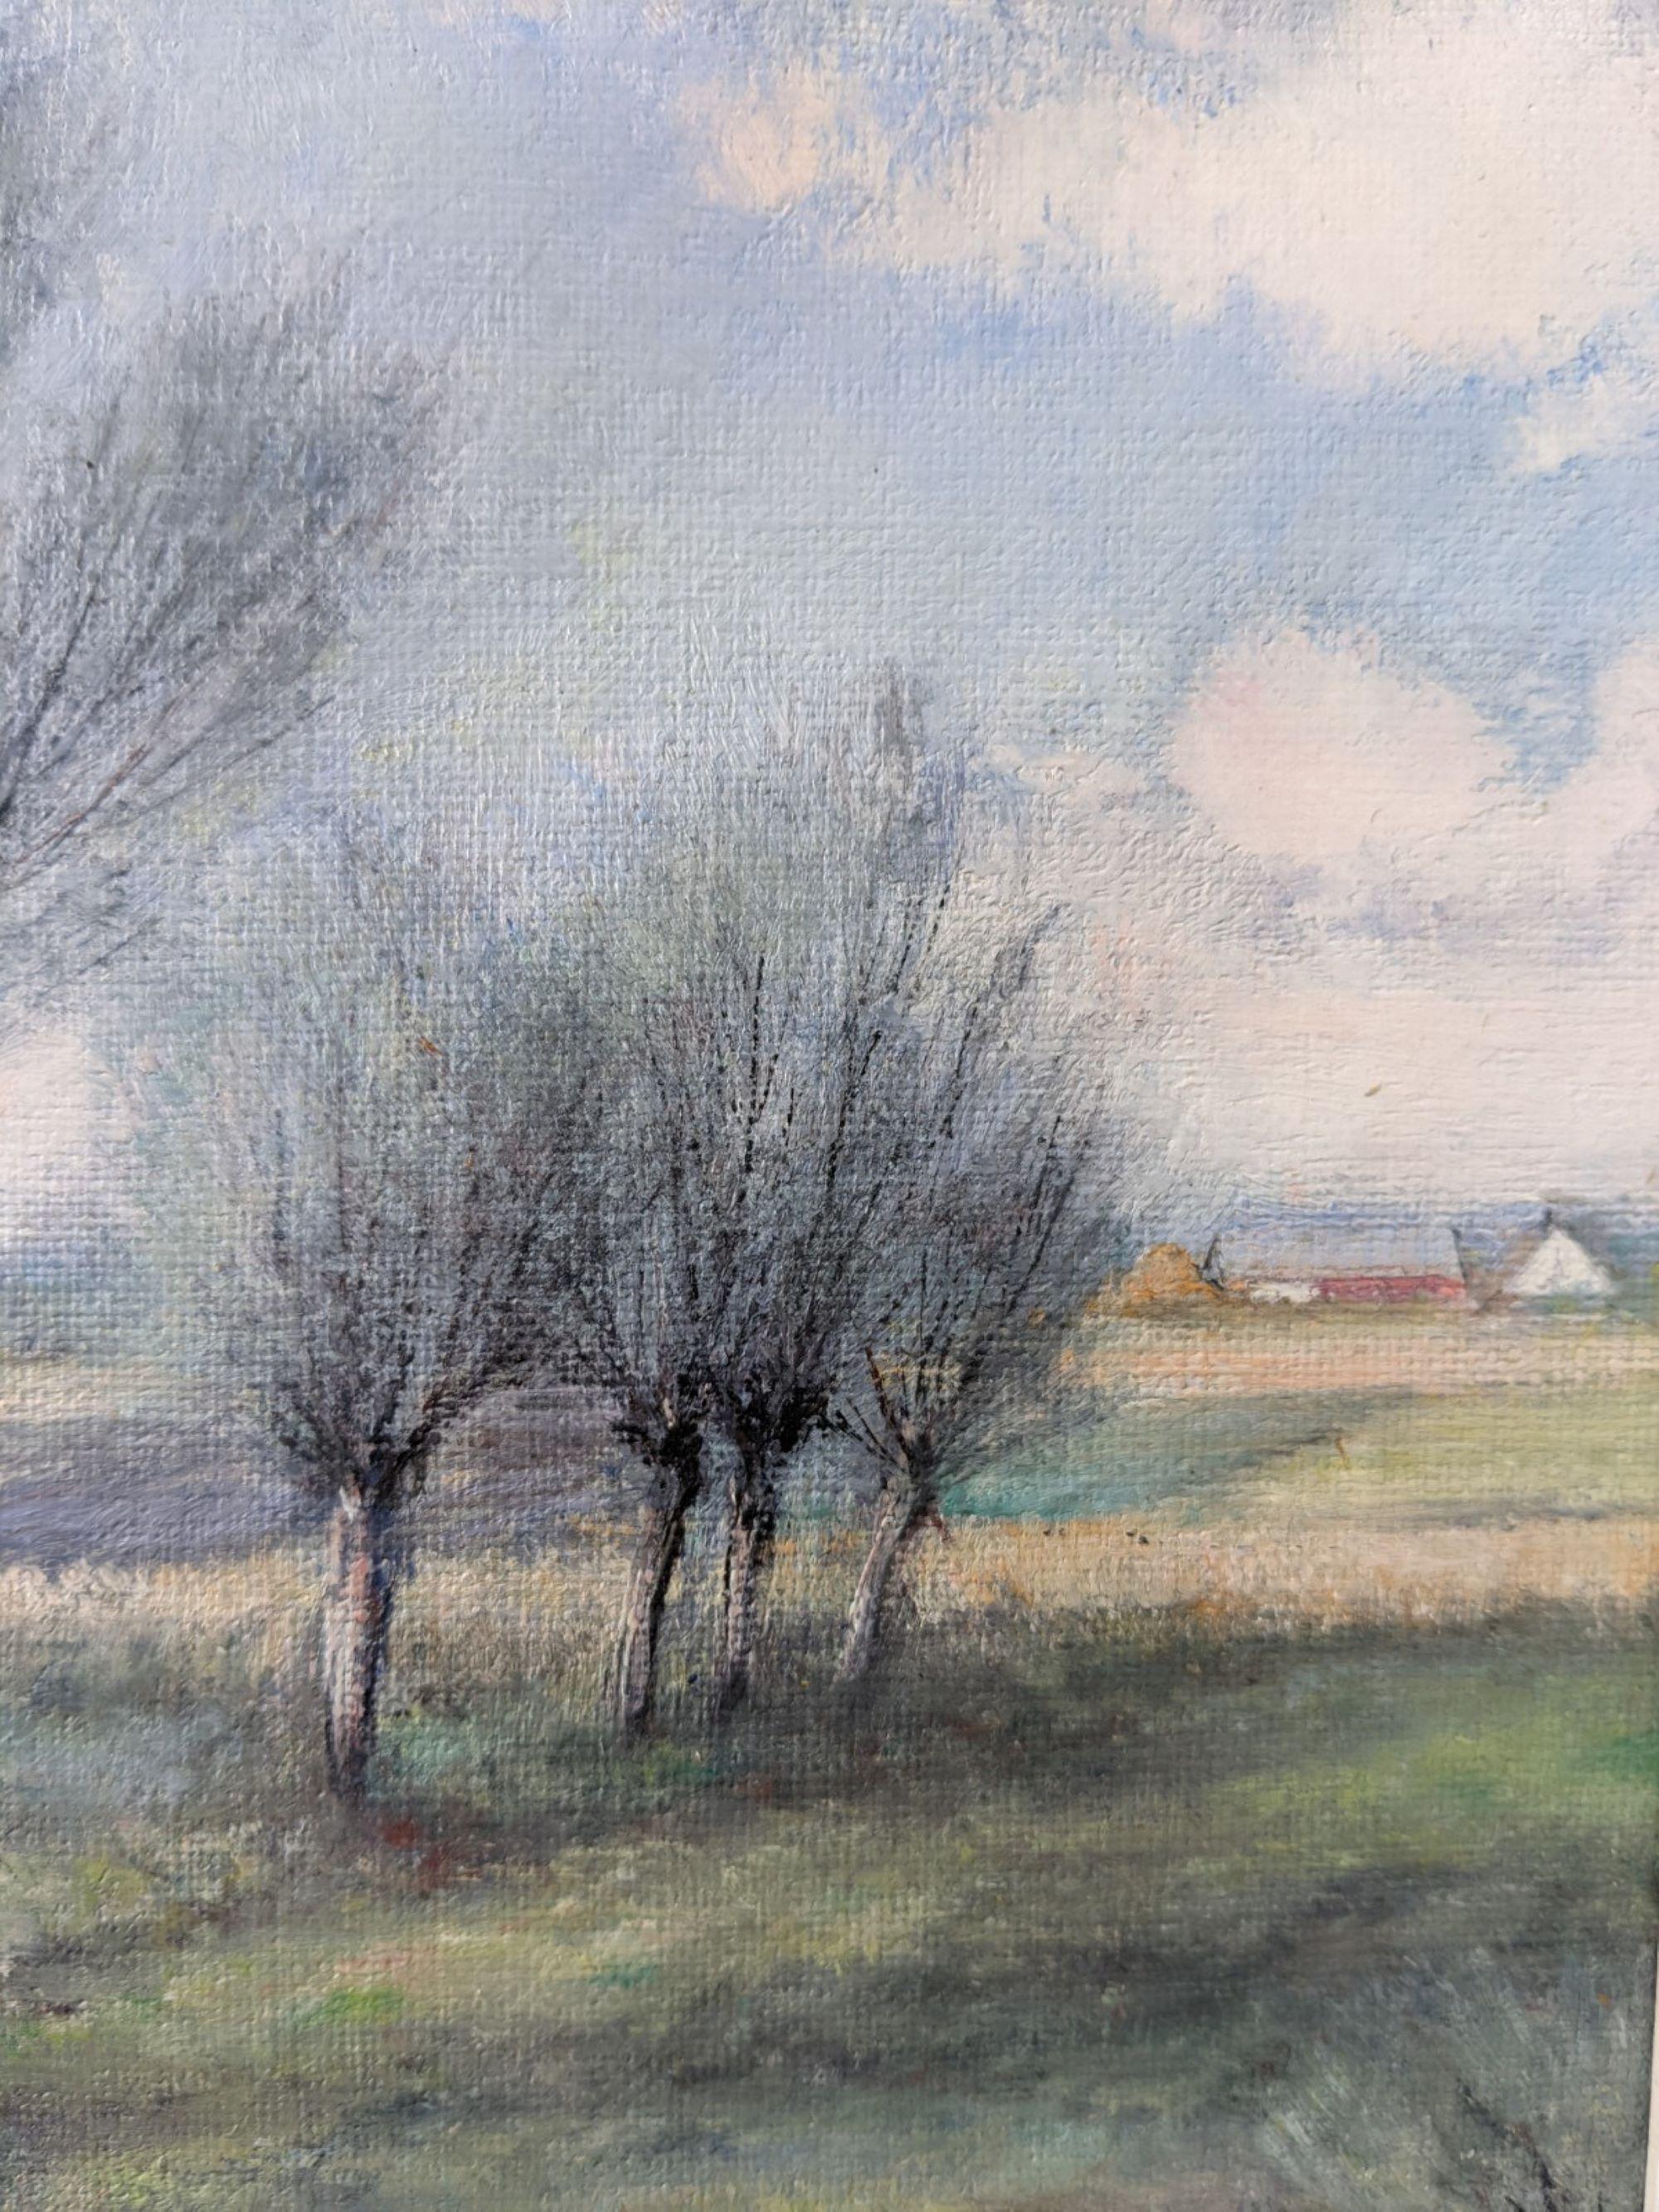 WINTER FIELDS
Size: 43 x 38 cm (including frame)
Oil on canvas

An intricately detailed mid century oil composition, painted onto canvas.

A line of denuded trees tempt the viewer to look deeper into the painting, drawing our attention the little